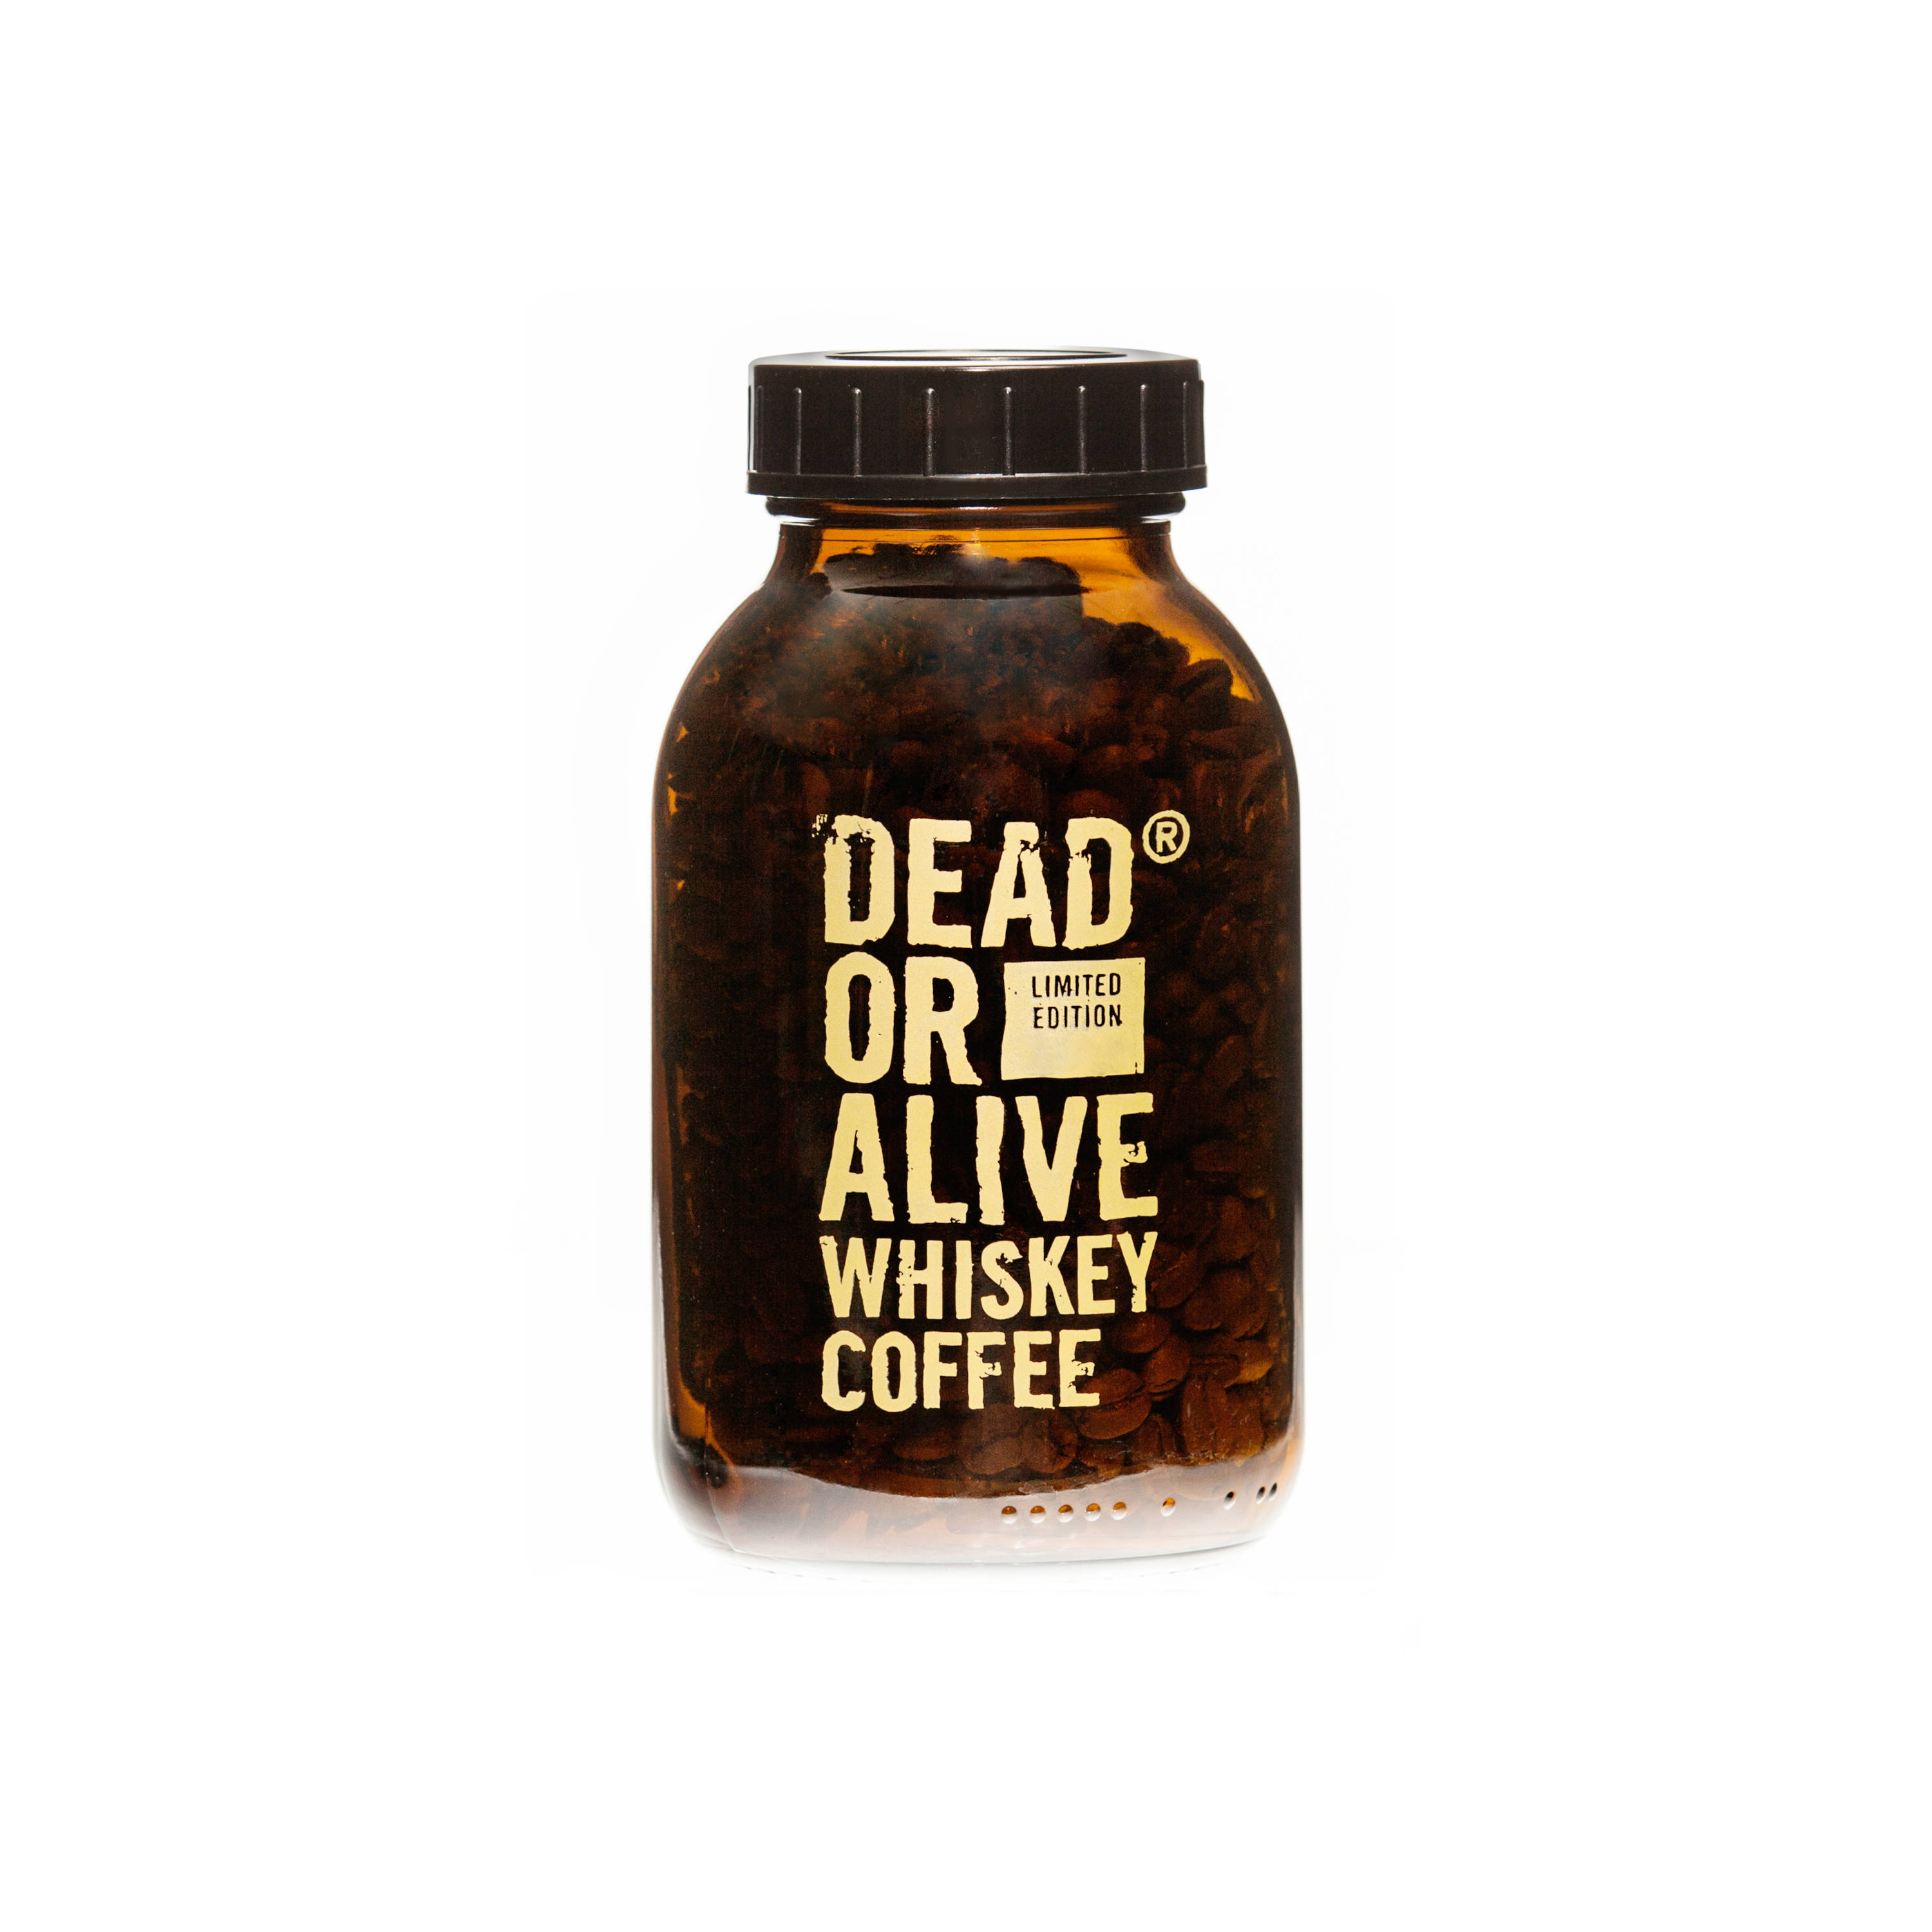 Dead or Alive Coffee Deadly Jack